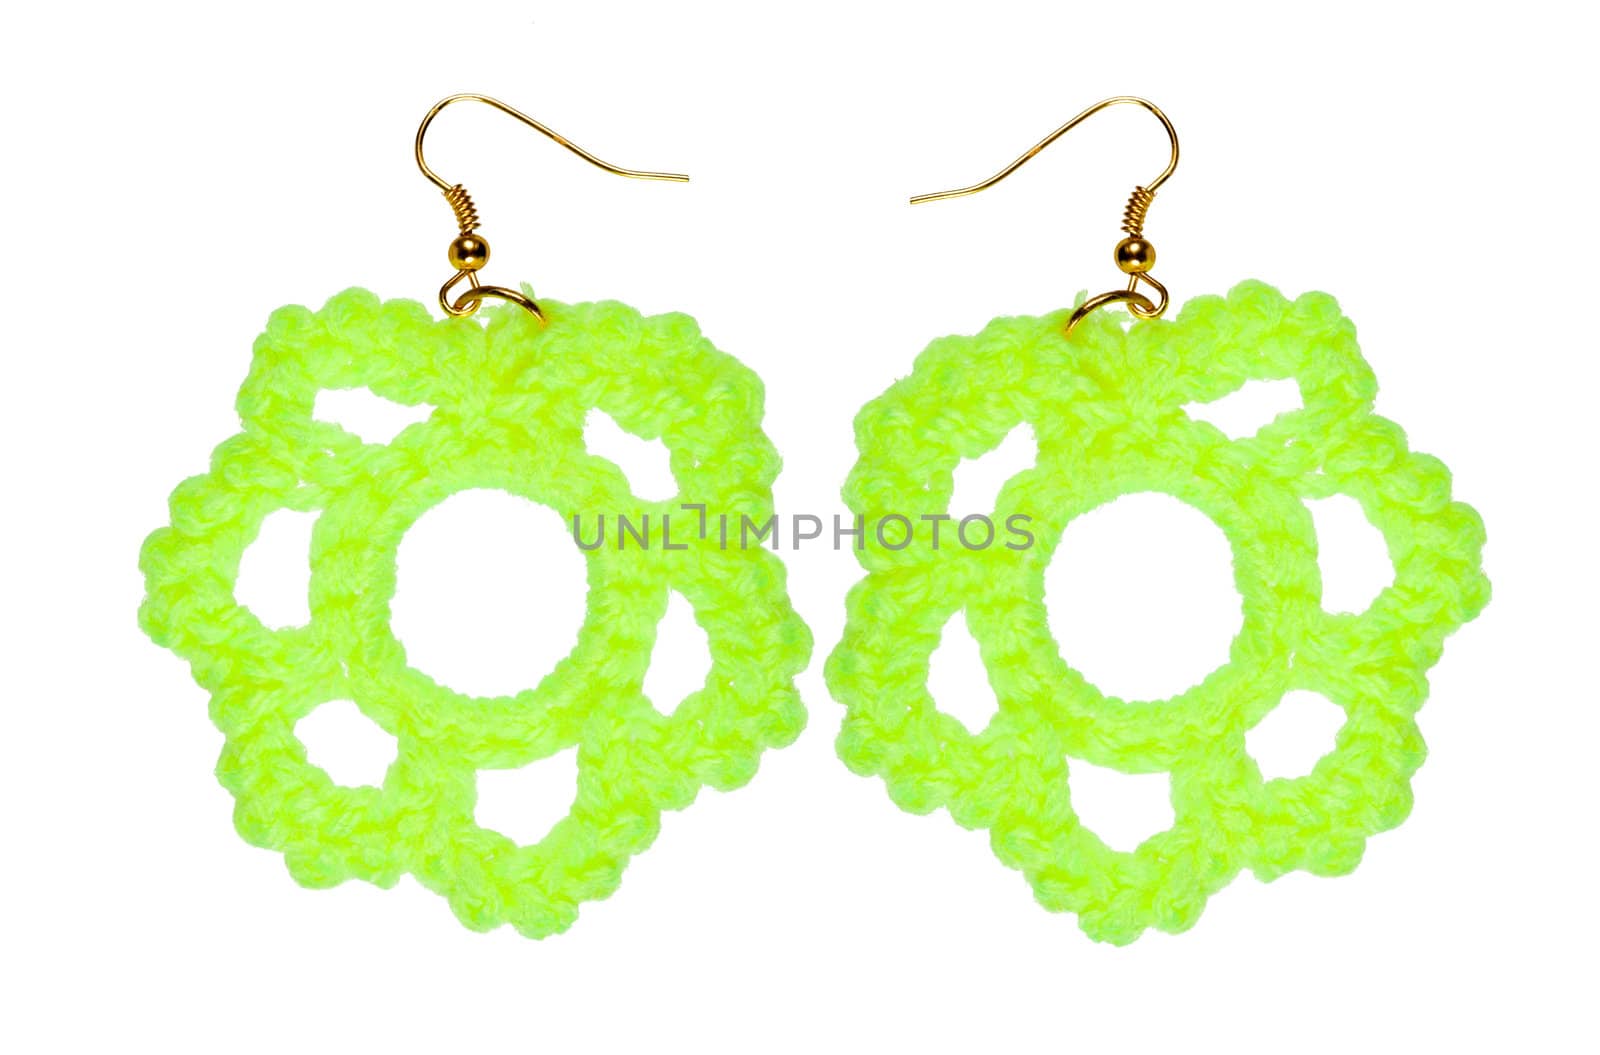 Knitted lace earrings on a white background. Handmade. Сollage